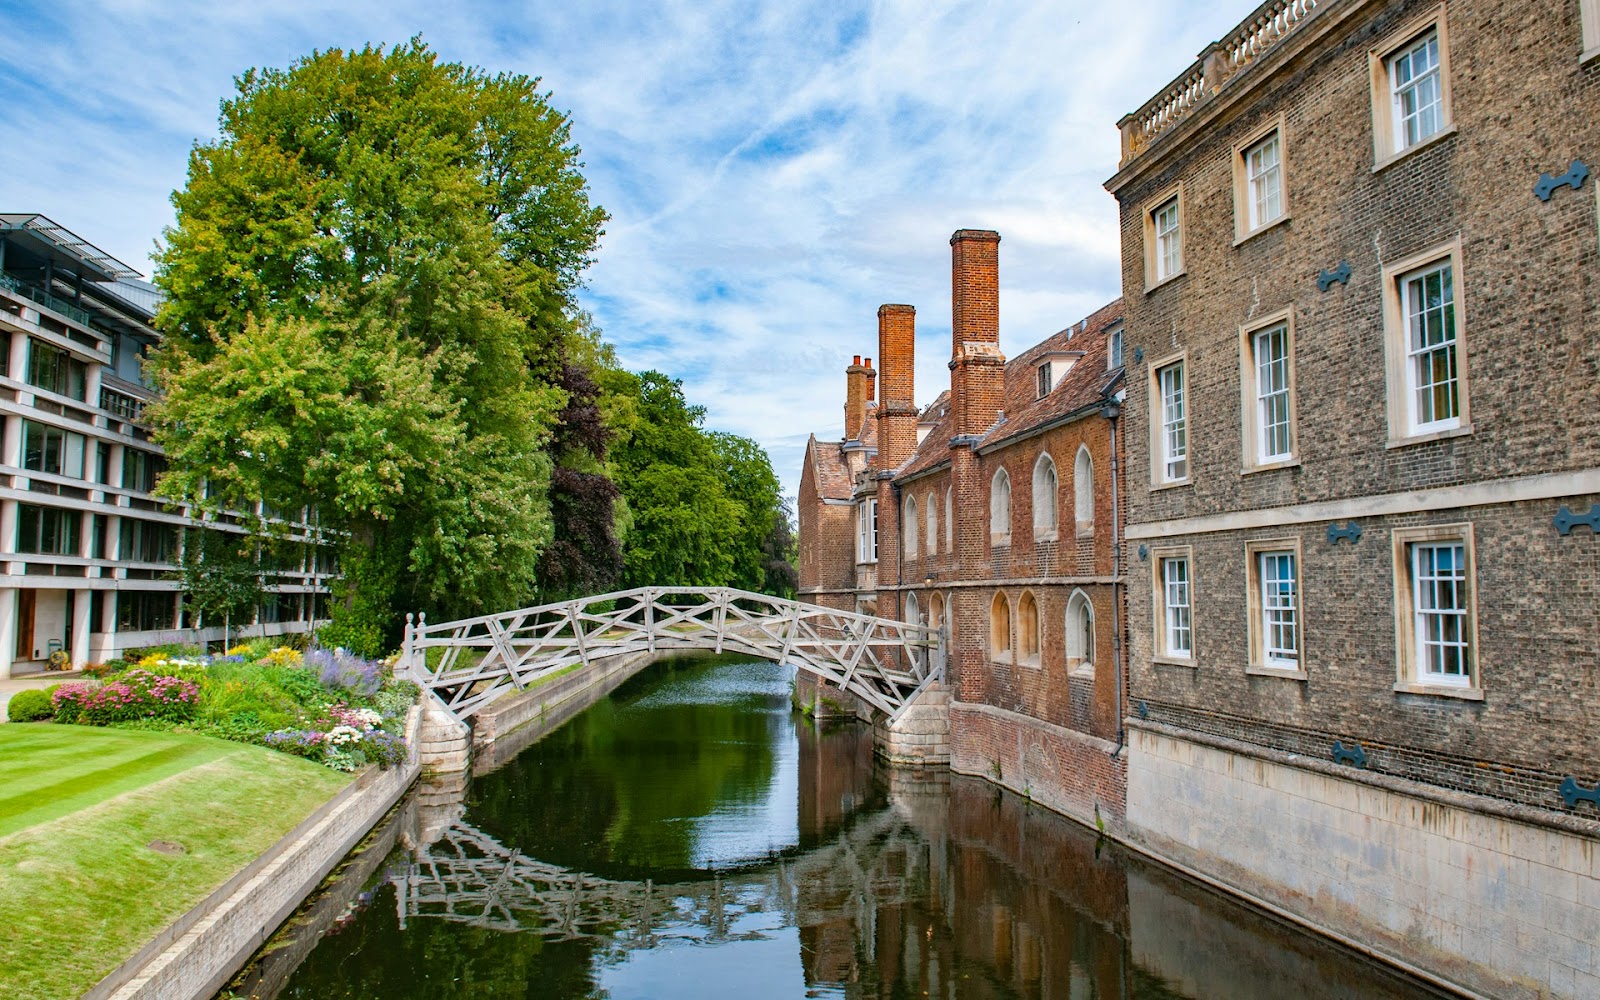 Mathematical Bridge - Best Things to Do in Cambridge